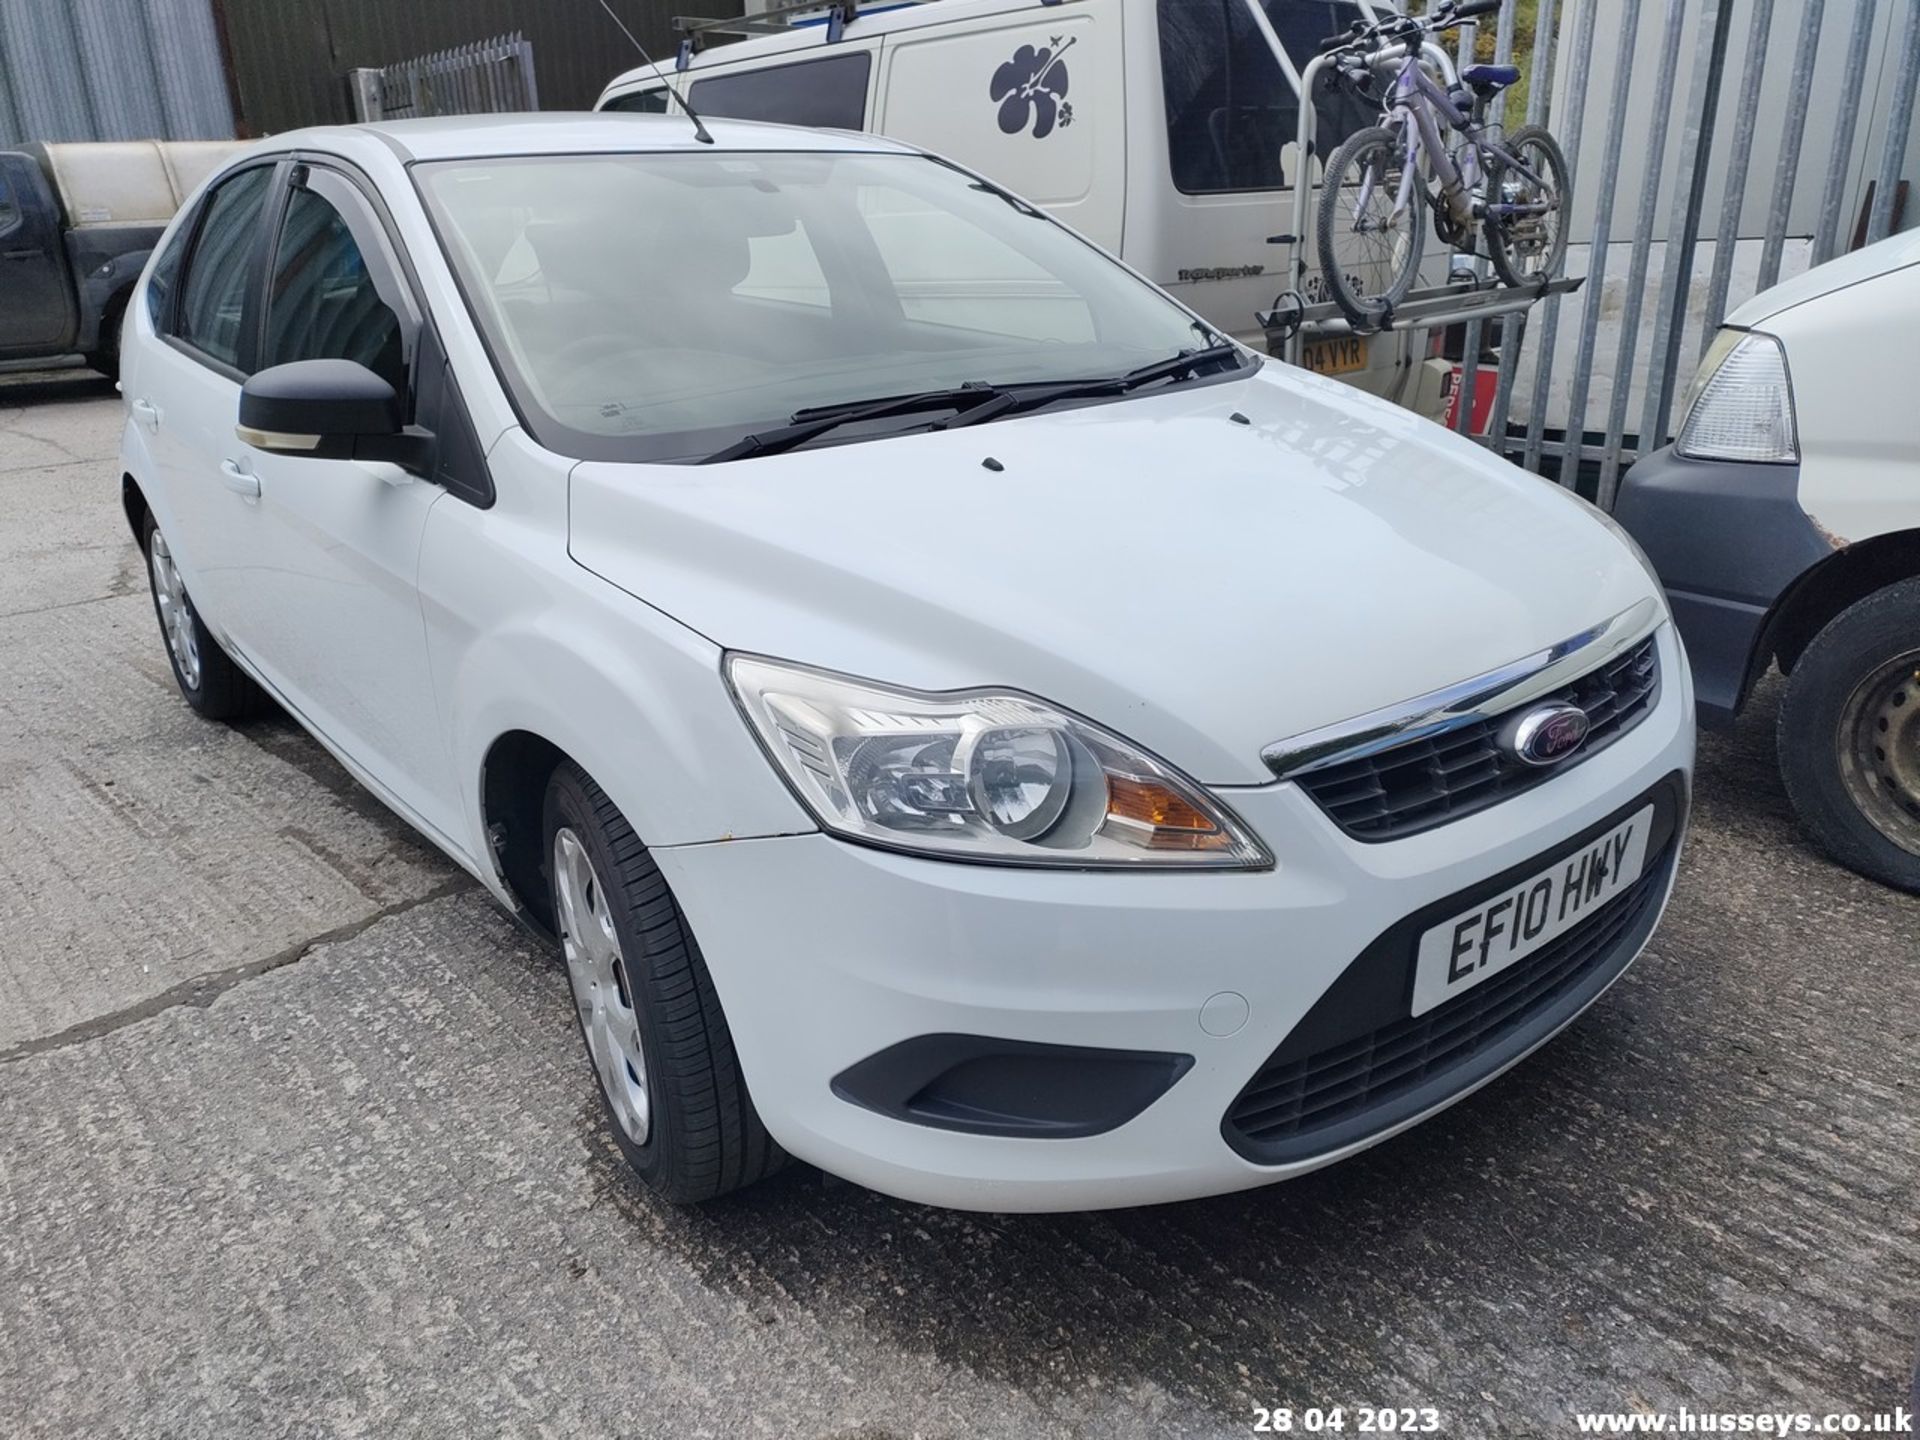 10/10 FORD FOCUS STYLE TDCI - 1560cc 5dr Hatchback (White)